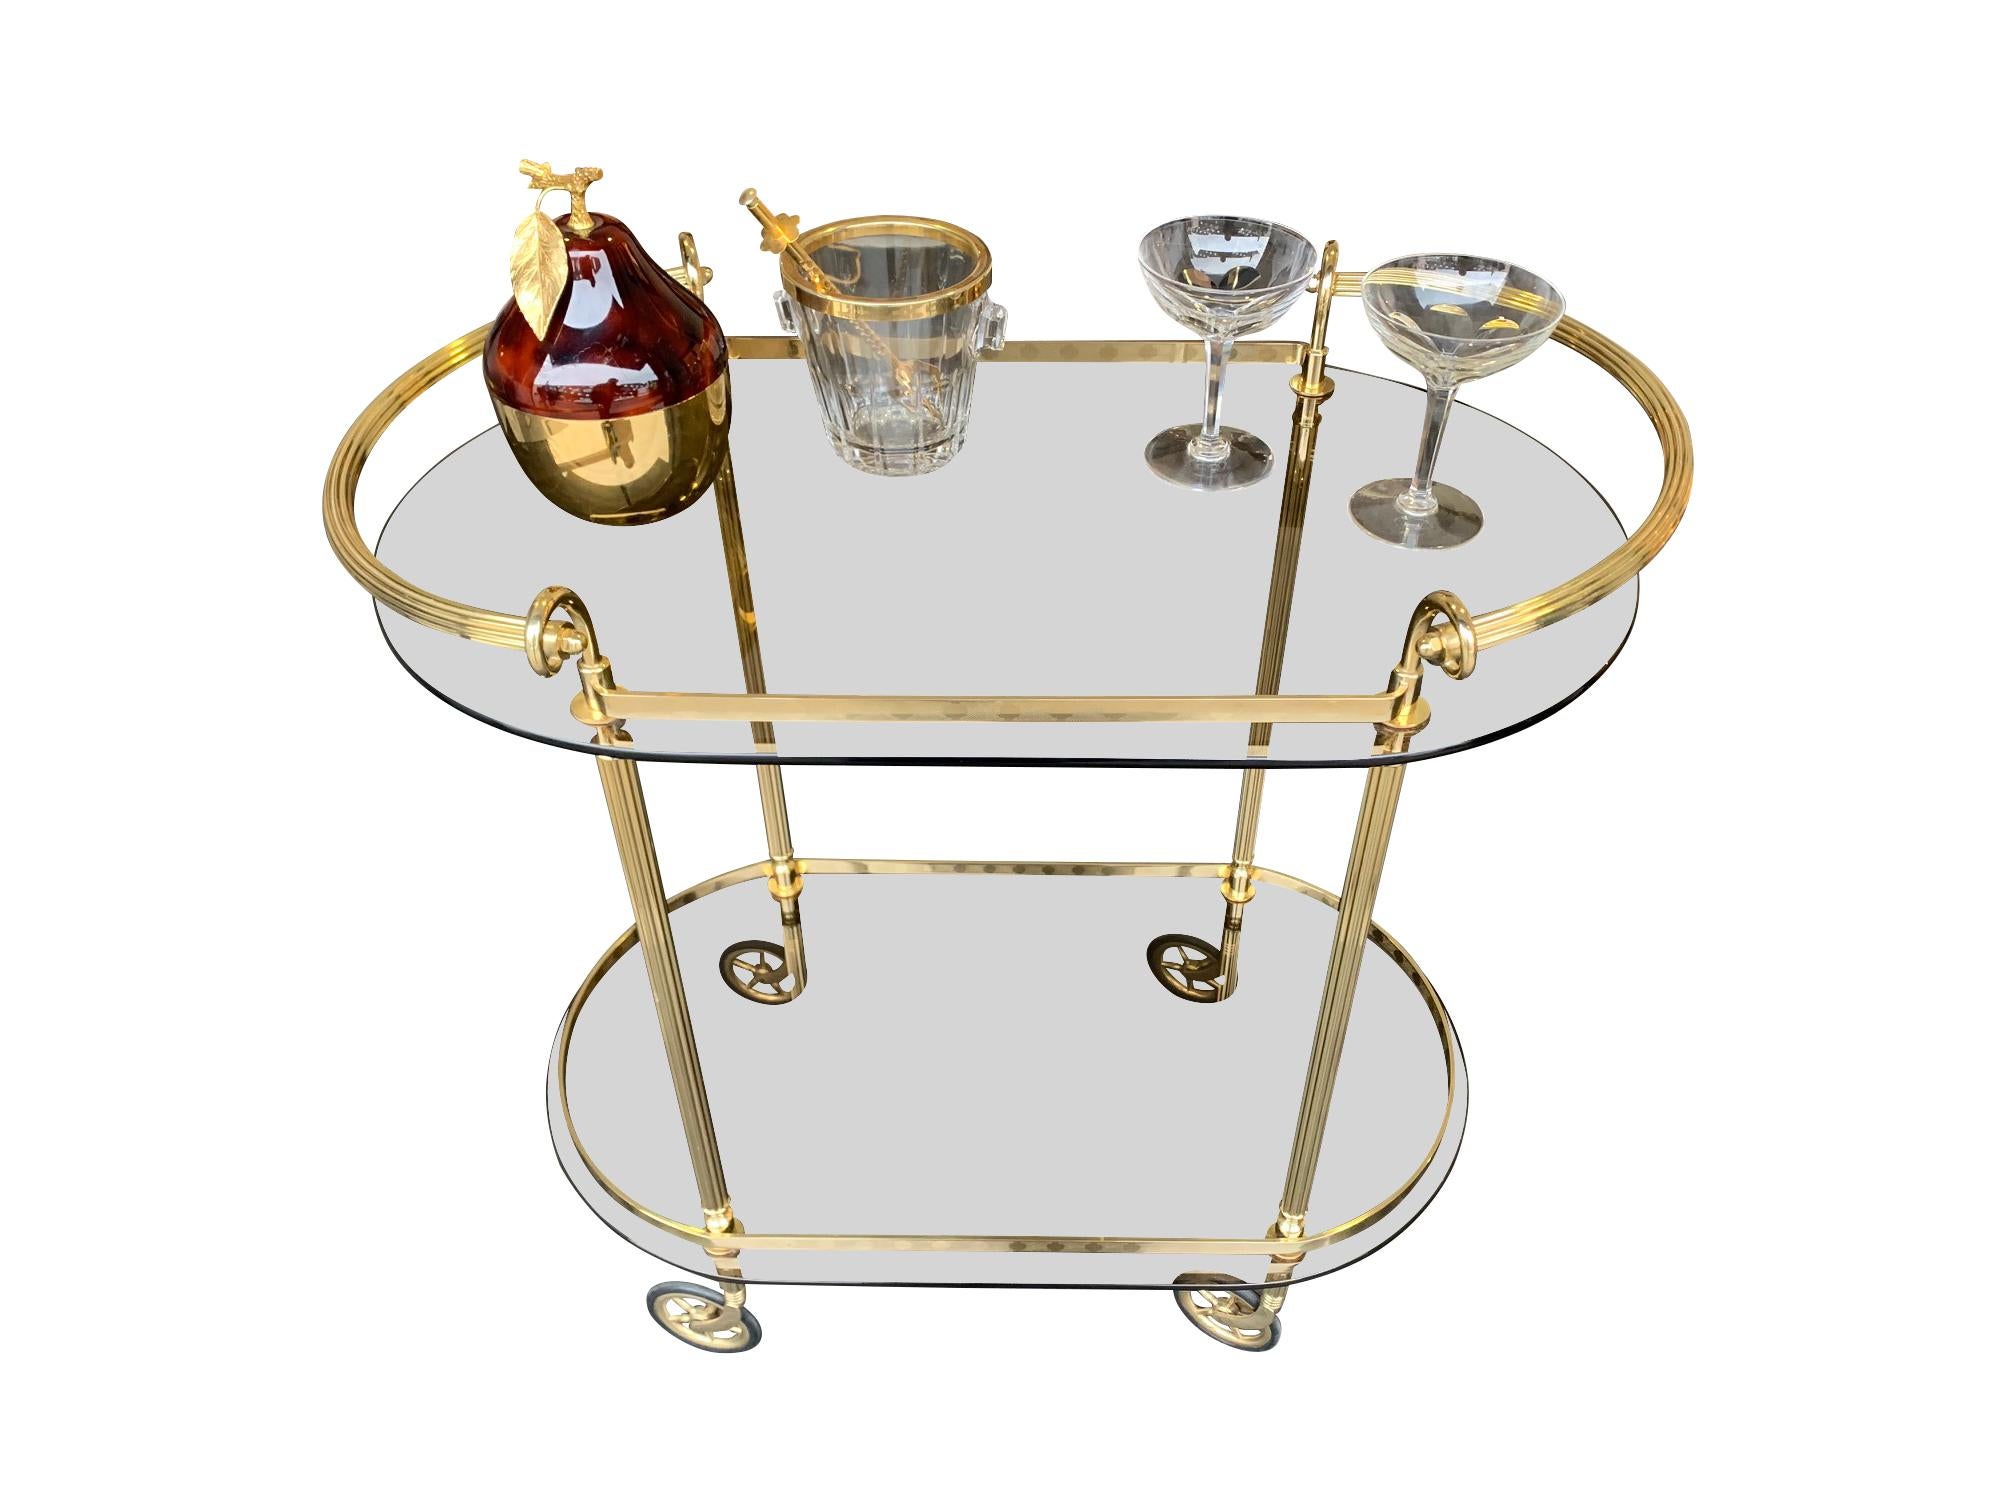 1960s Italian Midcentury Bar Cart with Smoked Glass Shelves and Brass Handles 3